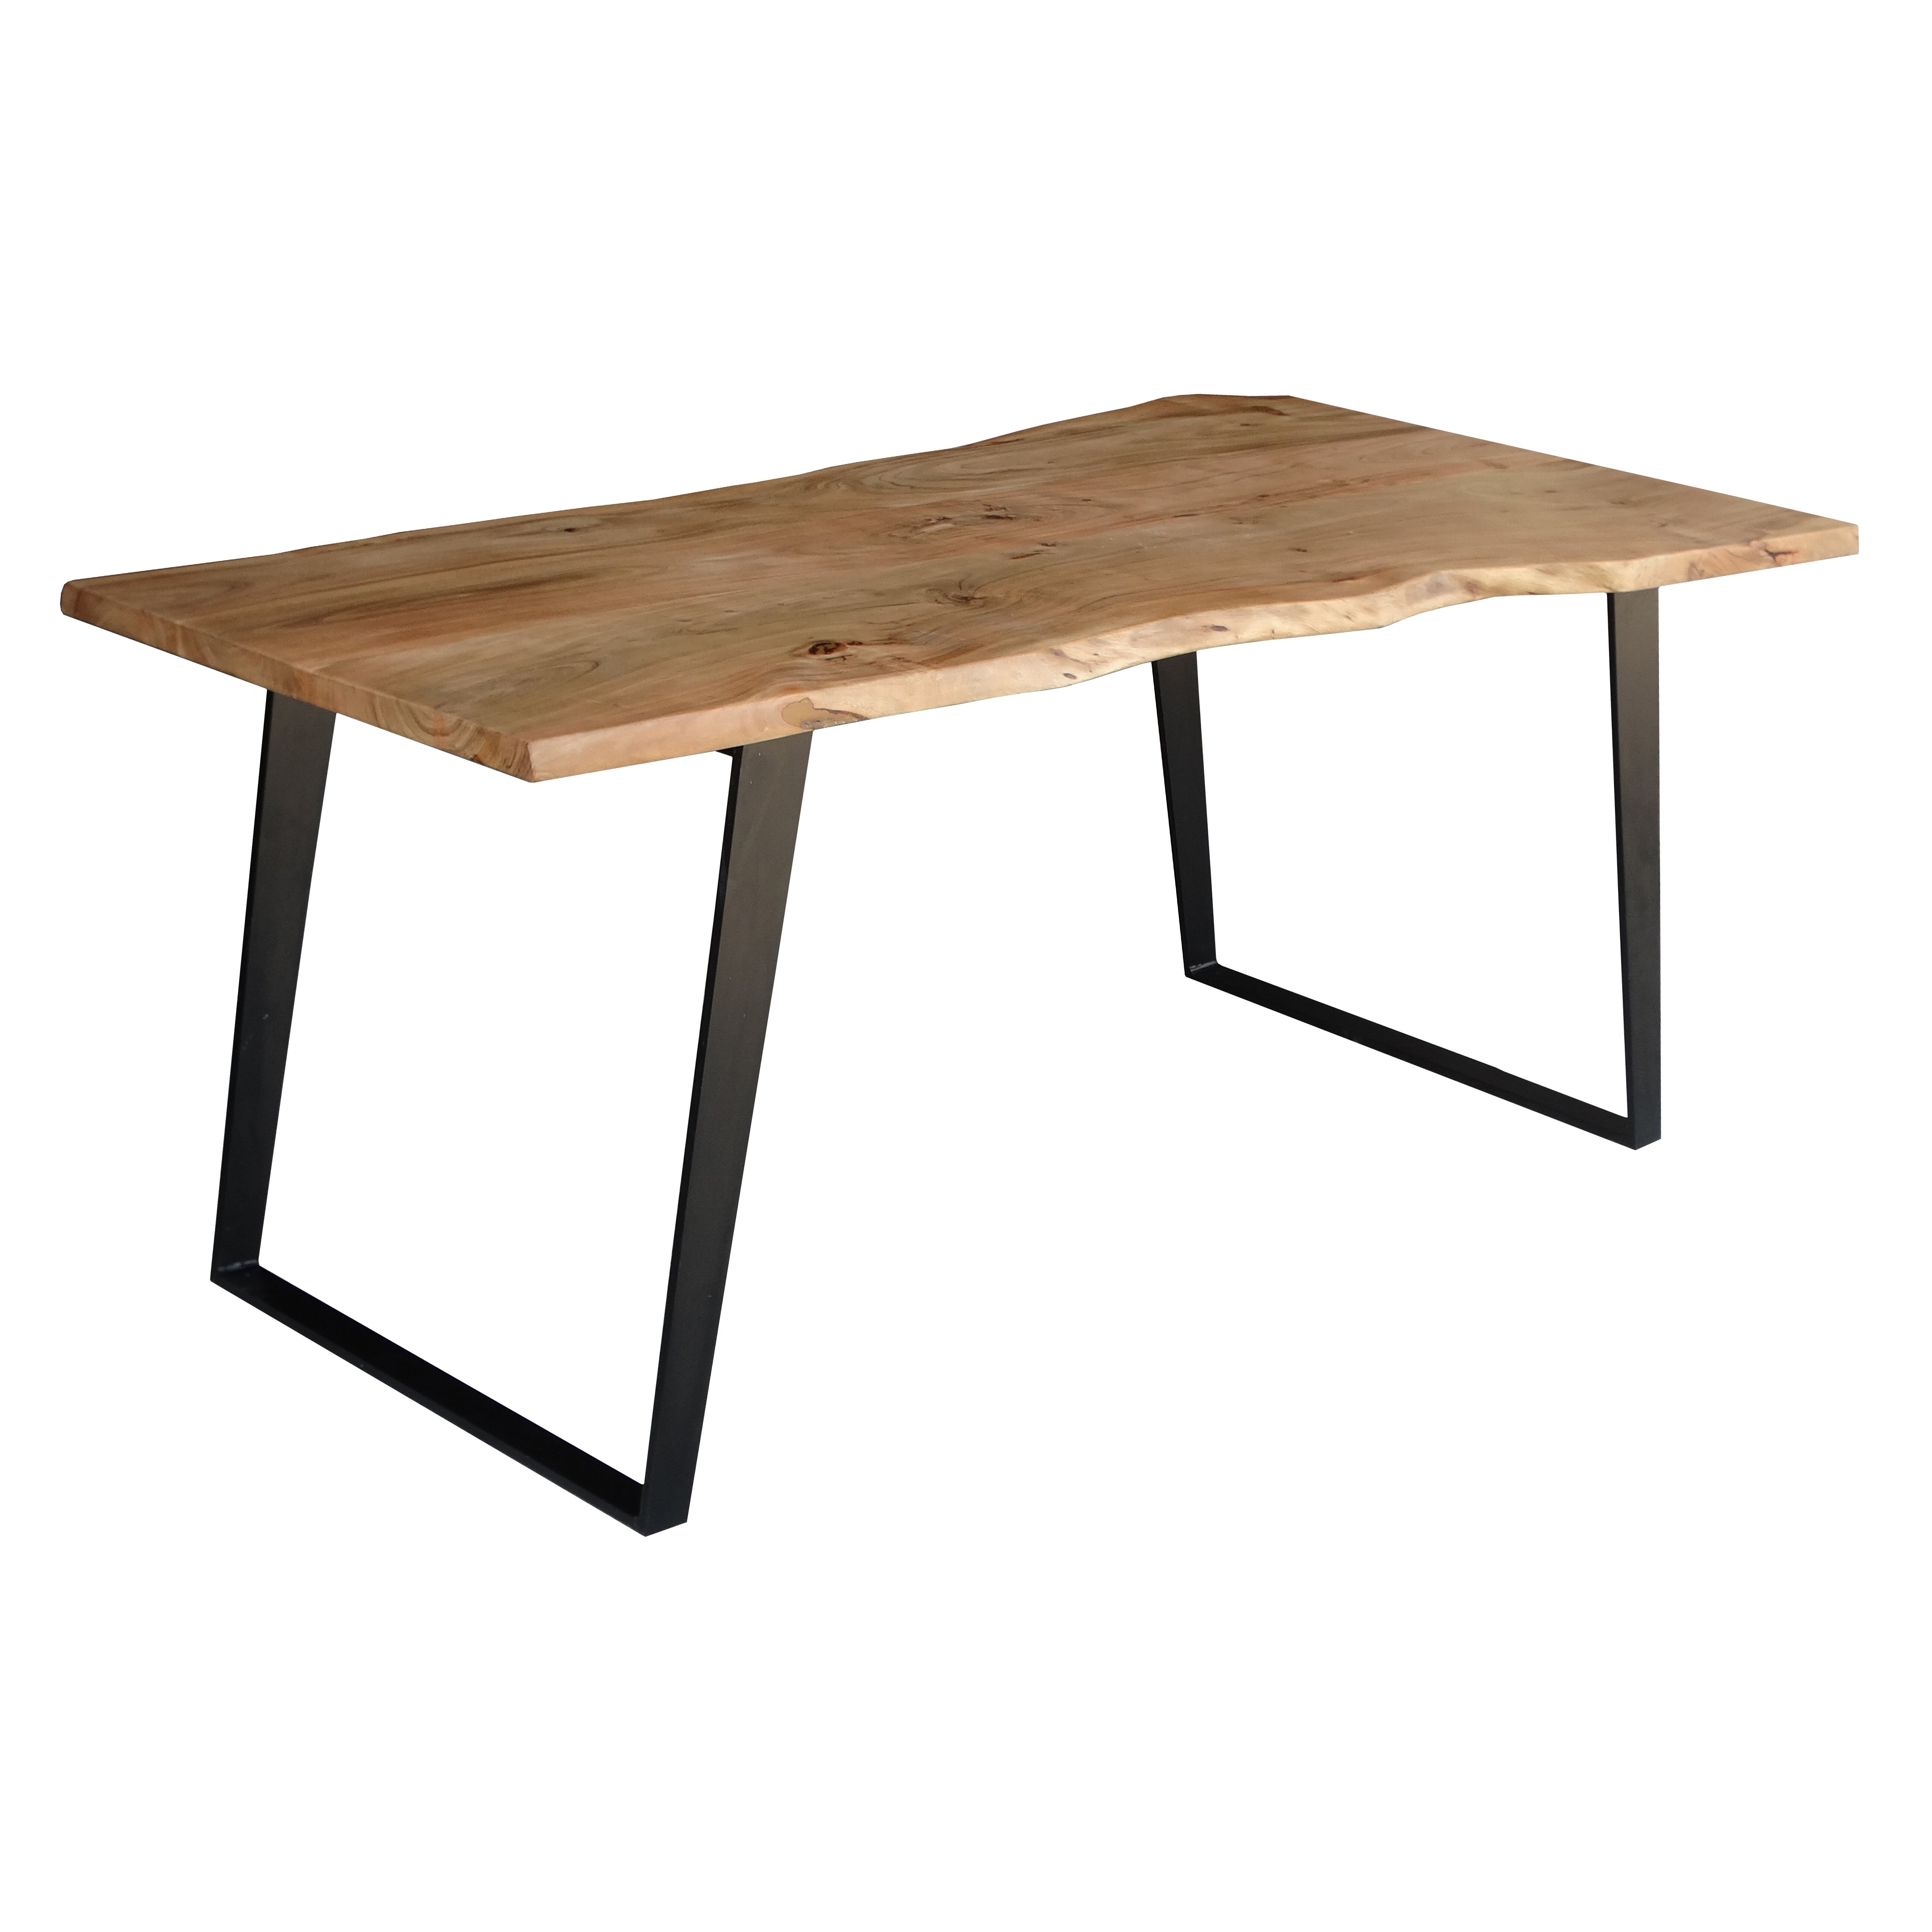 Timbergirl Solid Wood Live Edge Dining Table & Reviews | Wayfair.ca